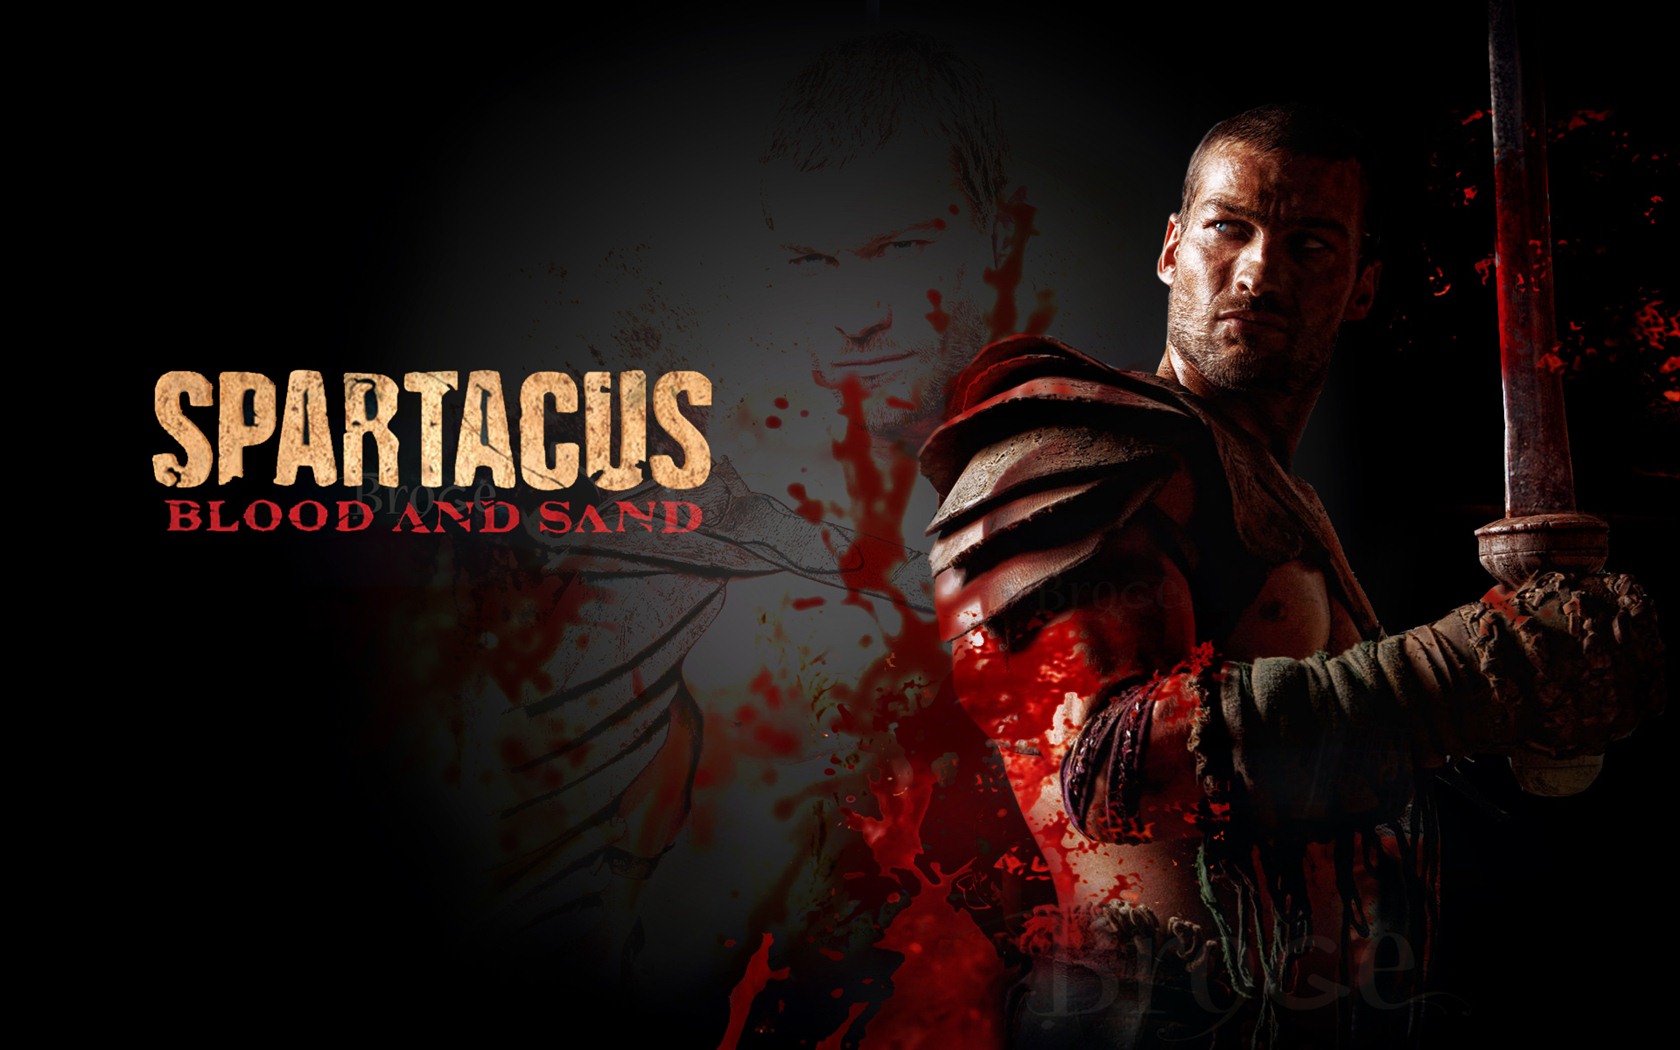 Spartacus: Blood and Sand HD Wallpaper #13 - 1680x1050